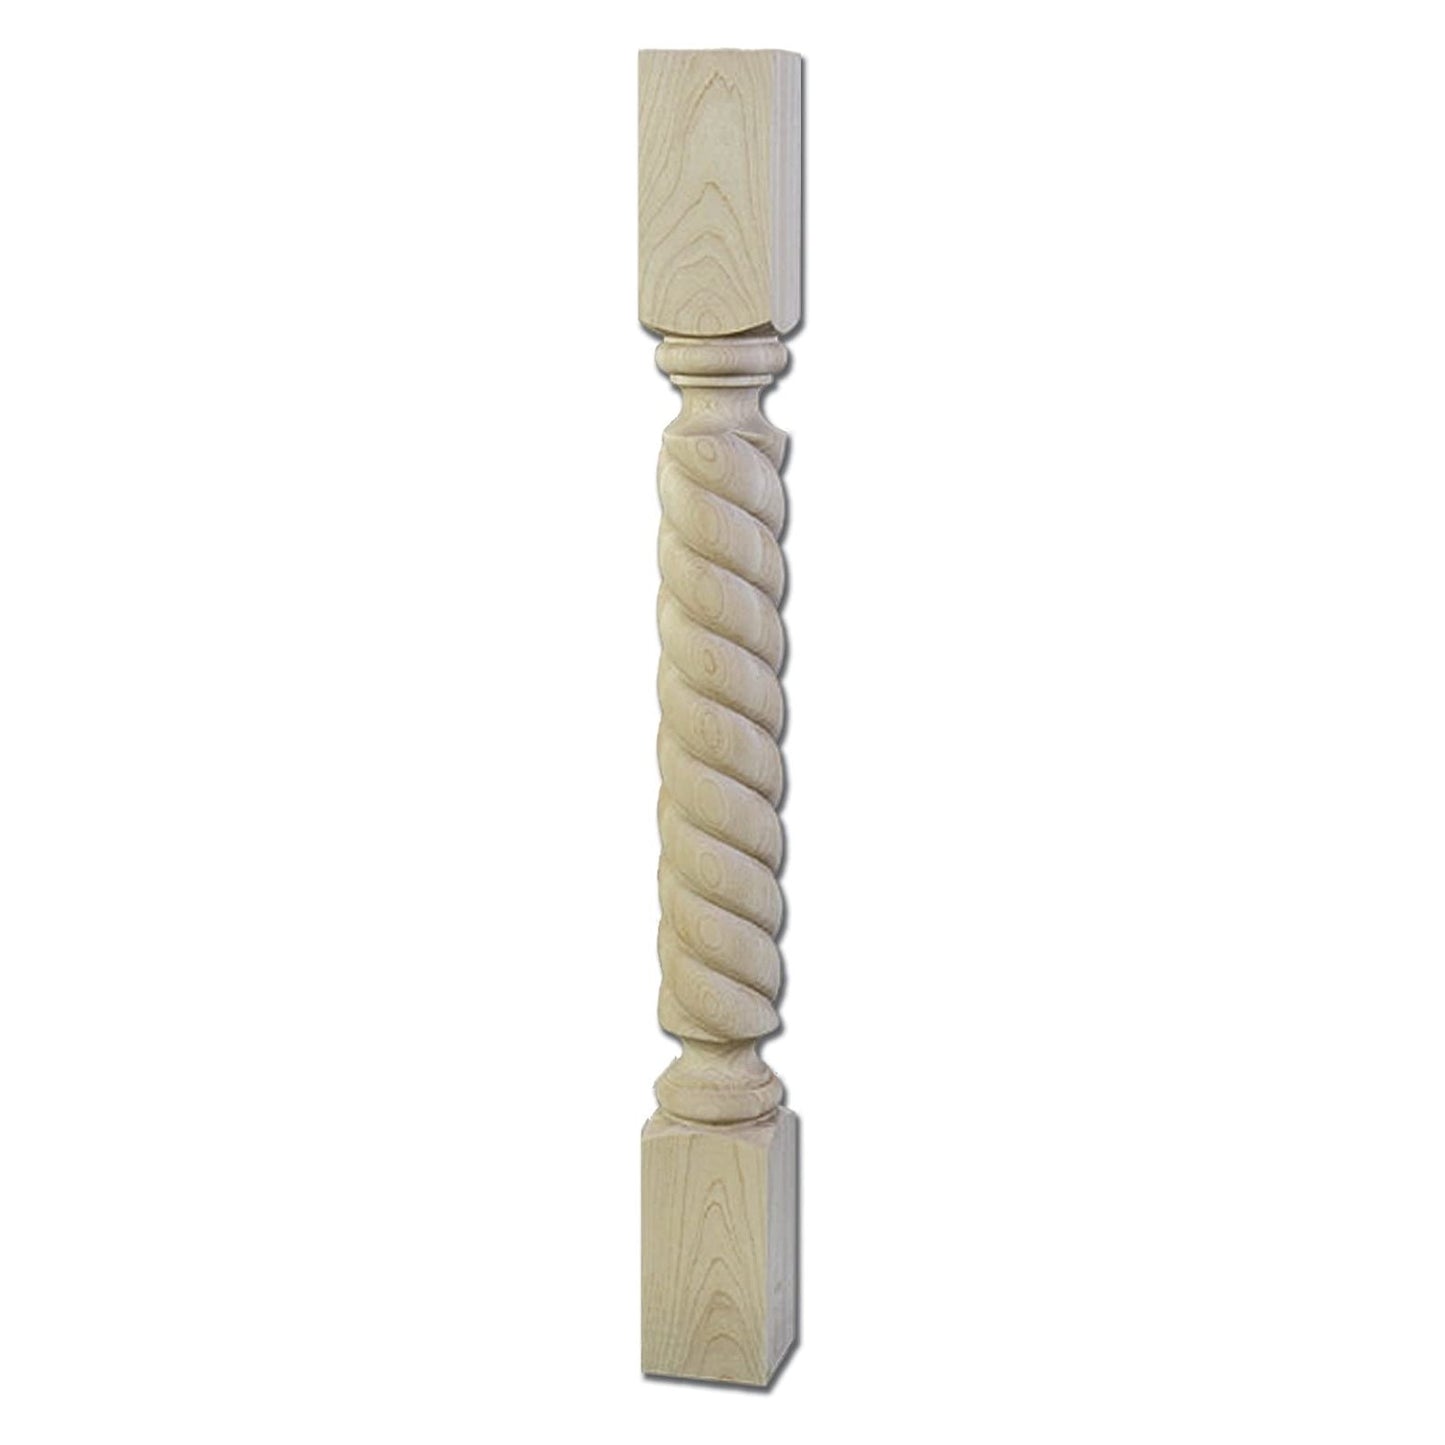 Rope Post 35-1/4" Tall x 3-1/2" Square